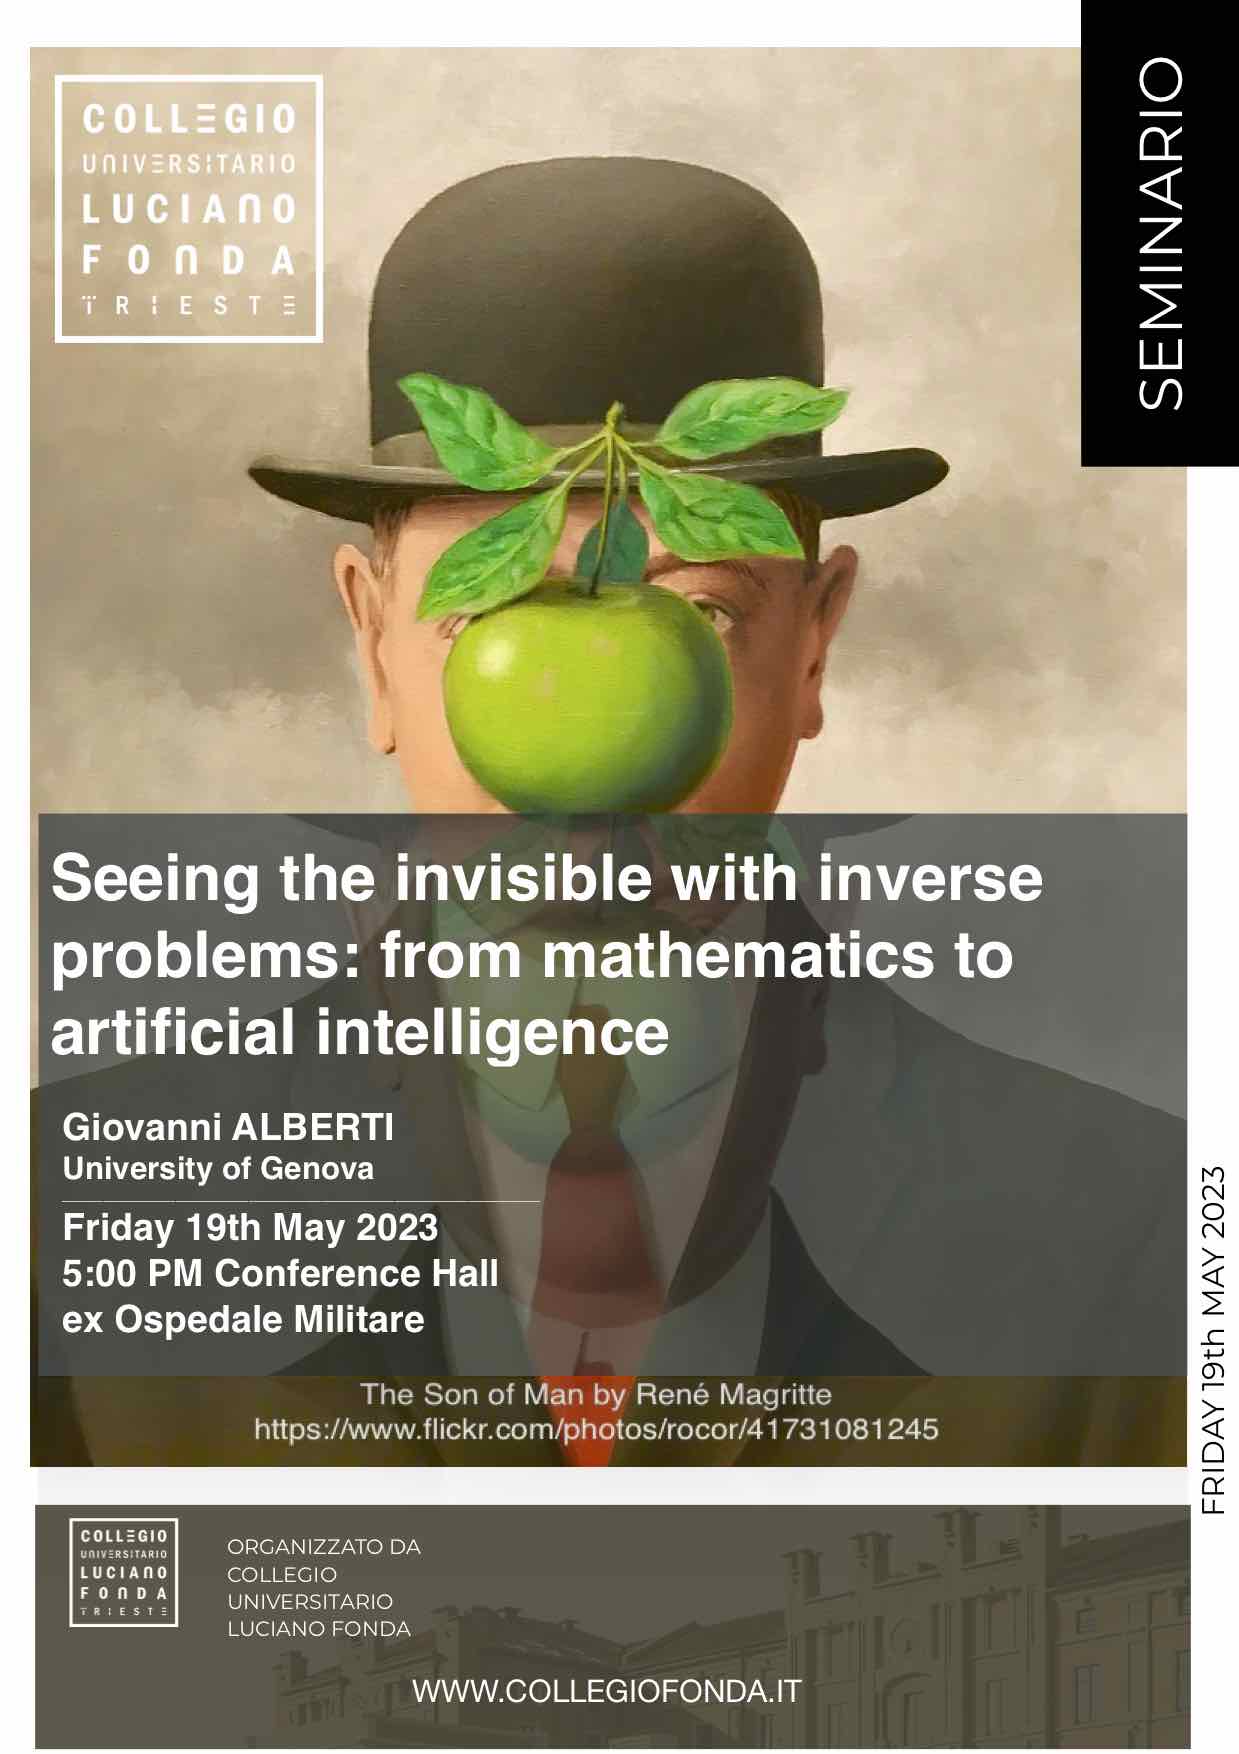 SEEING THE INVISIBLE WITH INVERSE PROBLEMS: FROM MATHEMATICS TO ARTIFICIAL INTELLIGENCE – Friday, 19th of May 2023 – Seminar by Giovanni Alberti